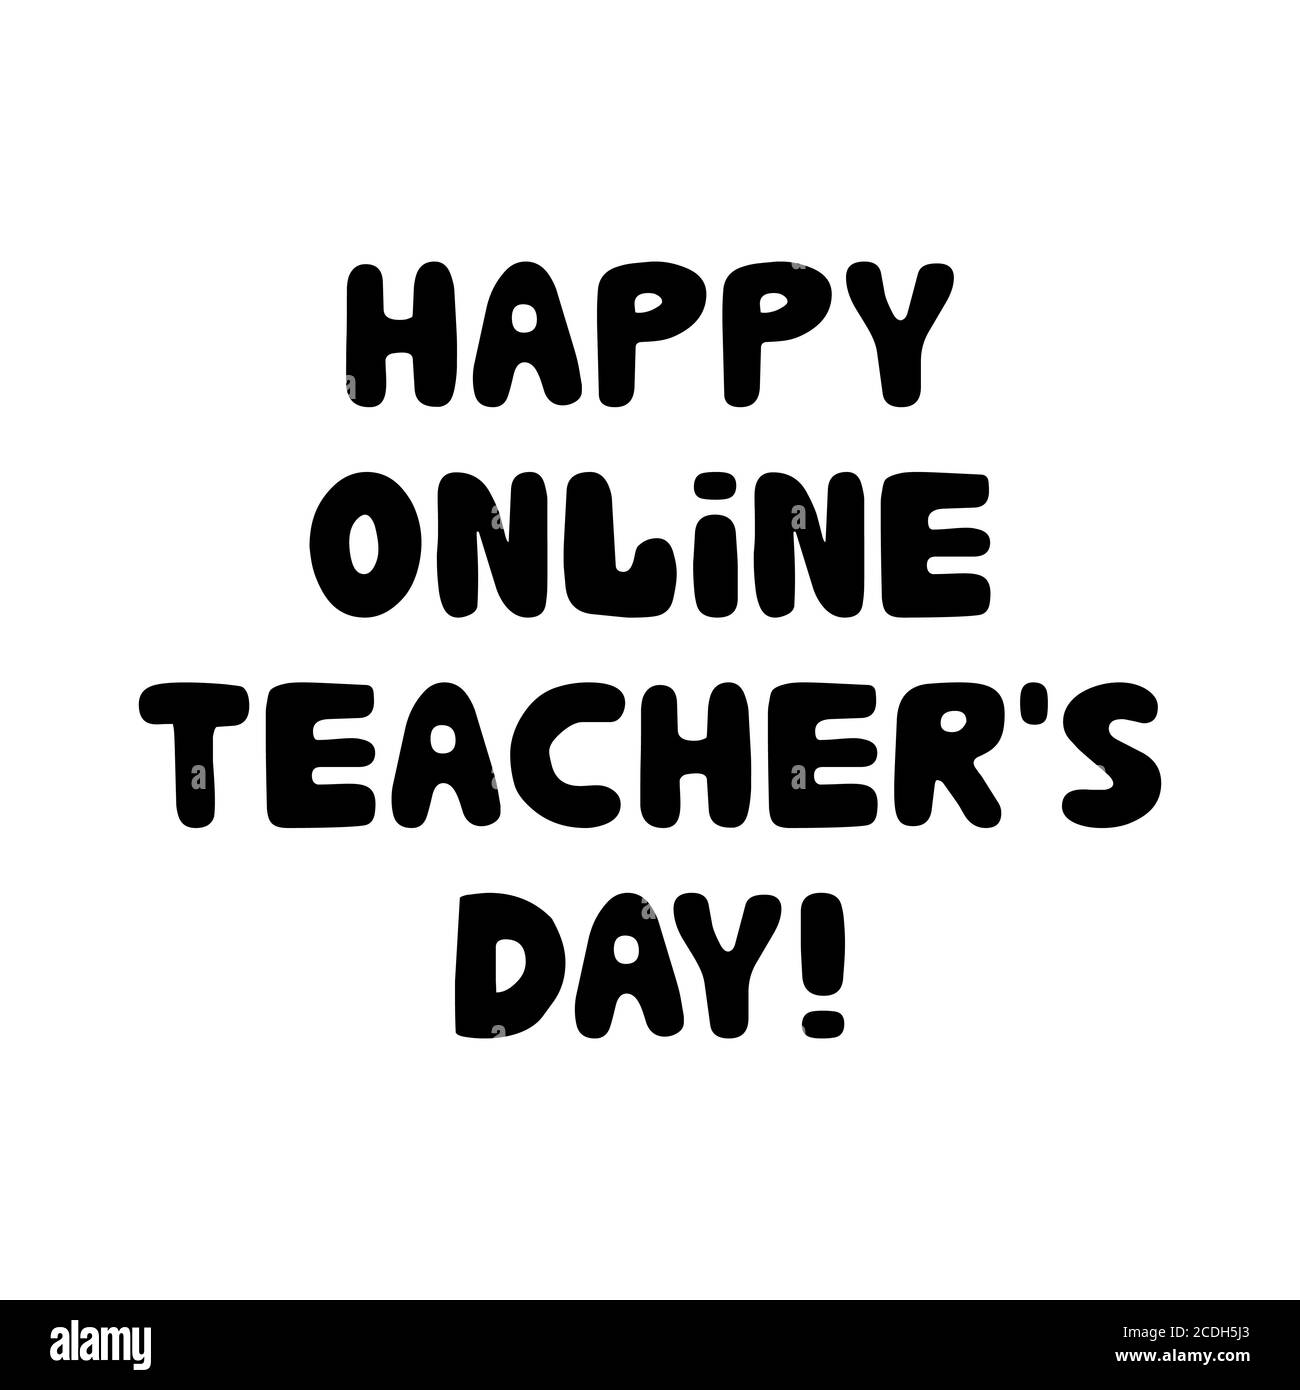 Teachers day Black and White Stock Photos & Images - Alamy